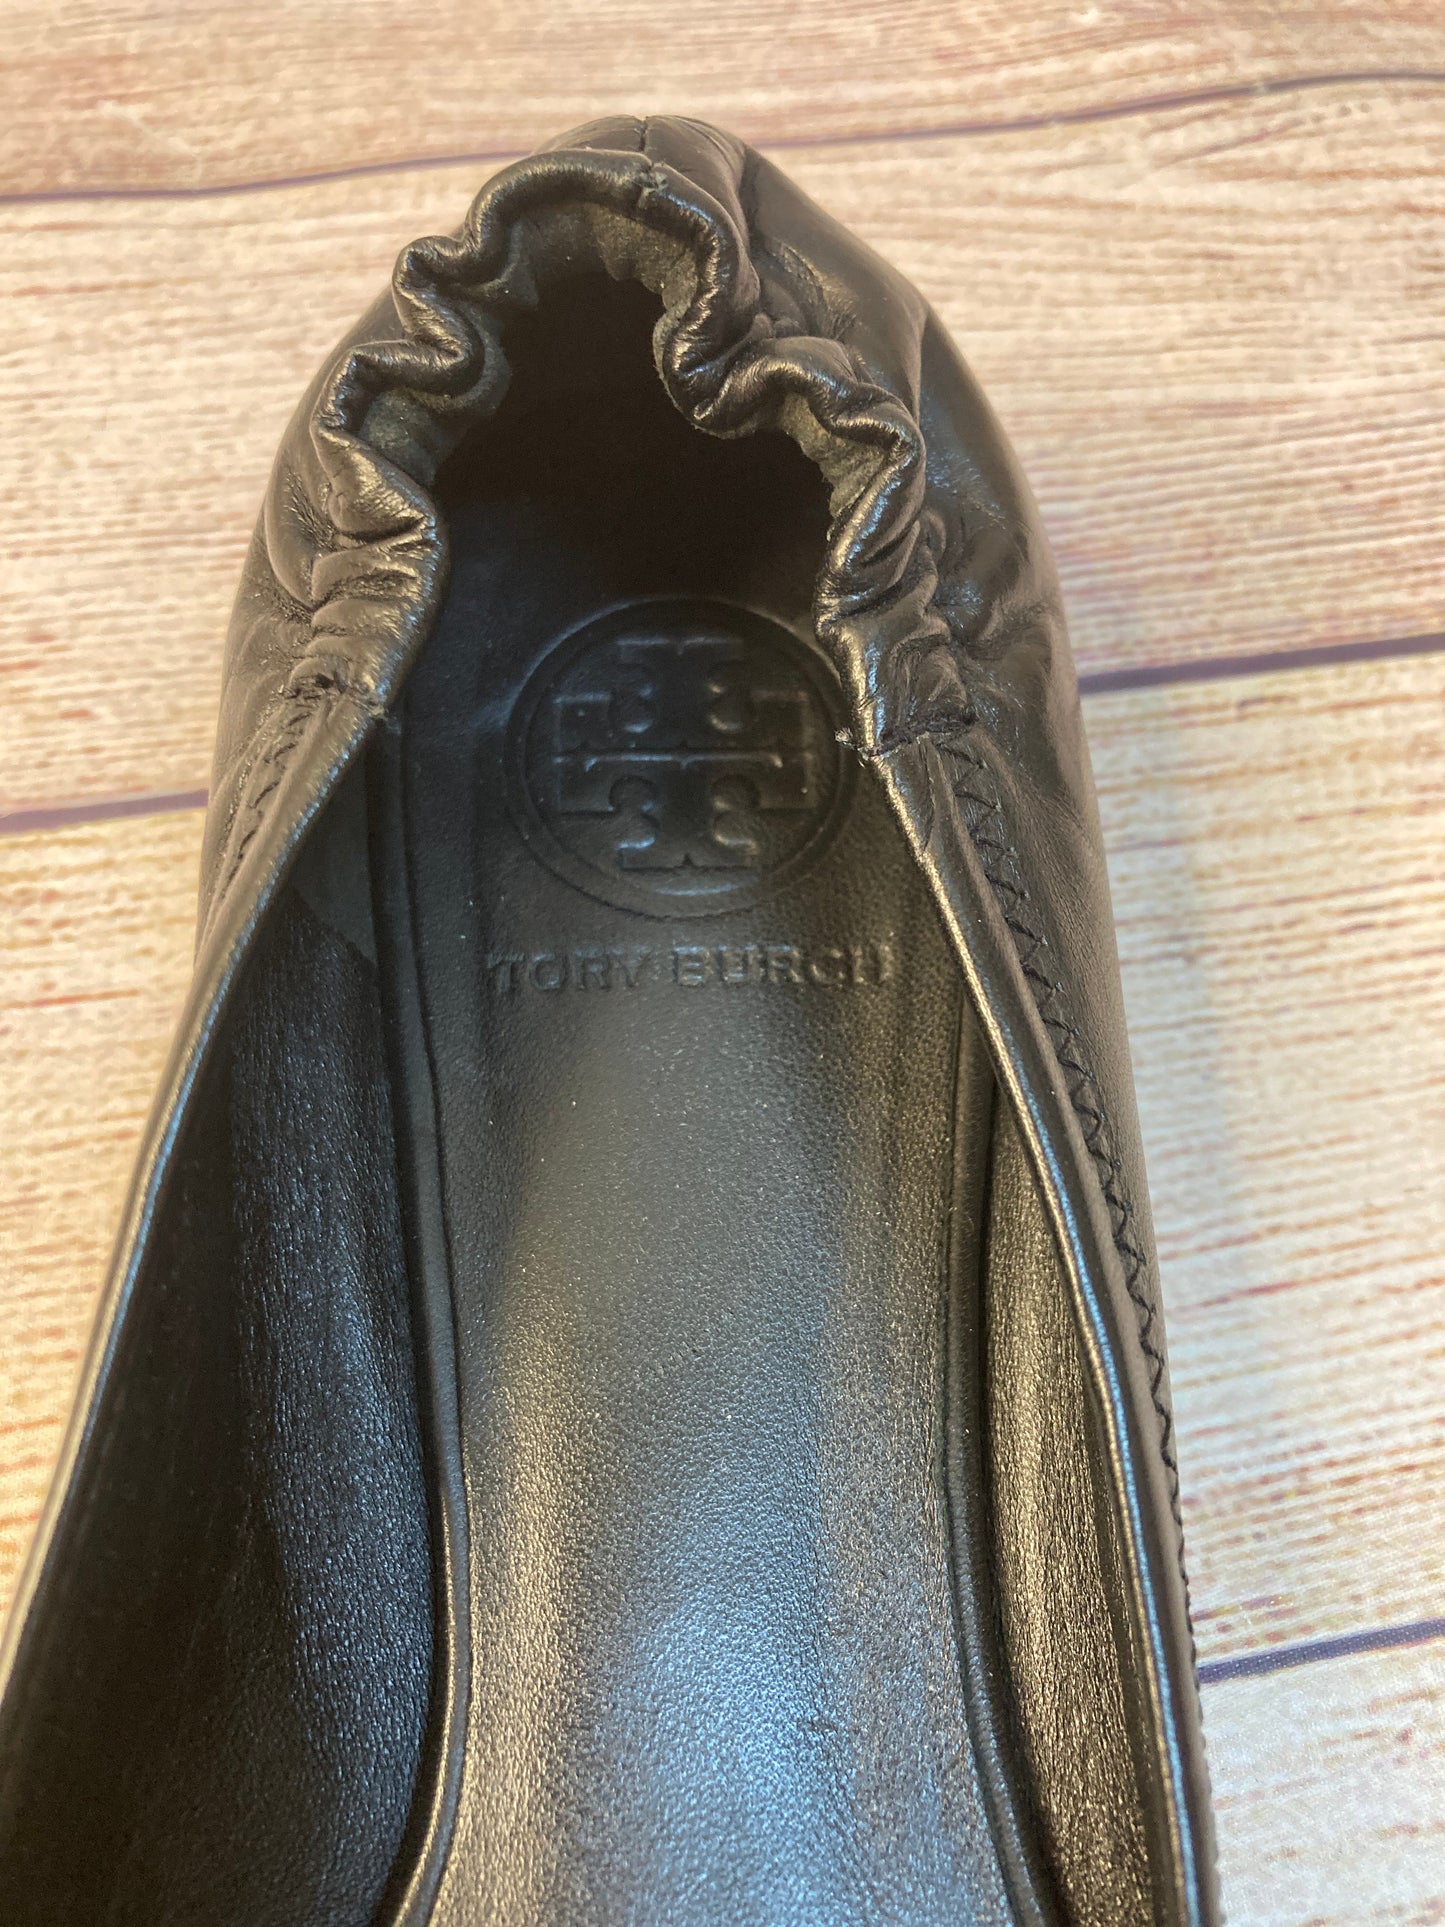 Shoes Flats By Tory Burch  Size: 8